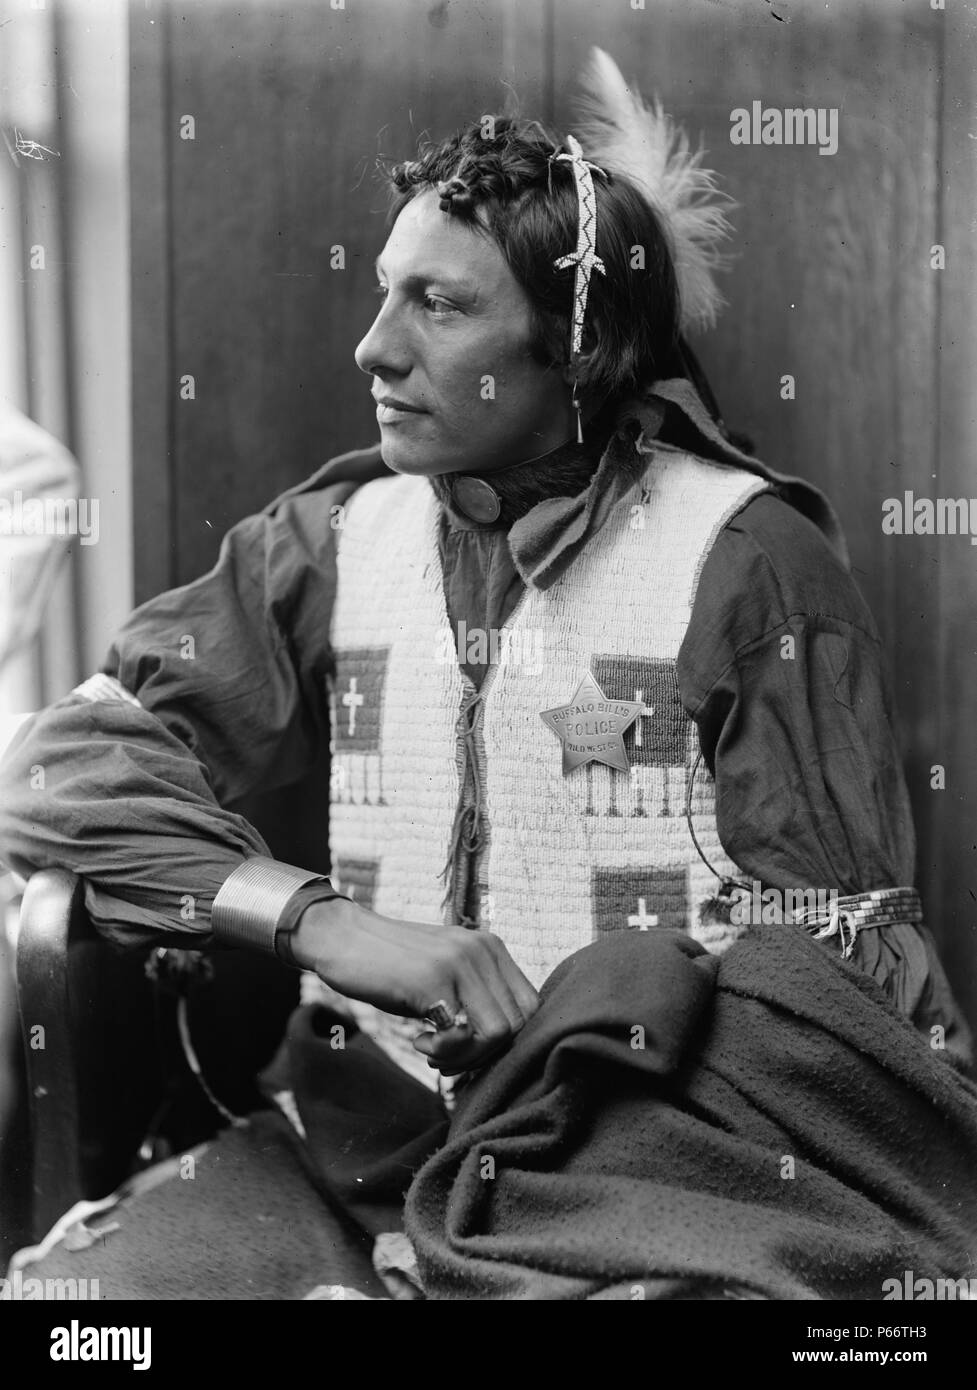 Unidentified American Indian by Photographer Gertrude Käsebier, 1852-1934. American Indian man, member of Buffalo Bill's Wild West Show, seated, facing left, wearing star-shaped badge reading: Buffalo Bill's Wild West Co. Police. Dated ca. 1900 Stock Photo